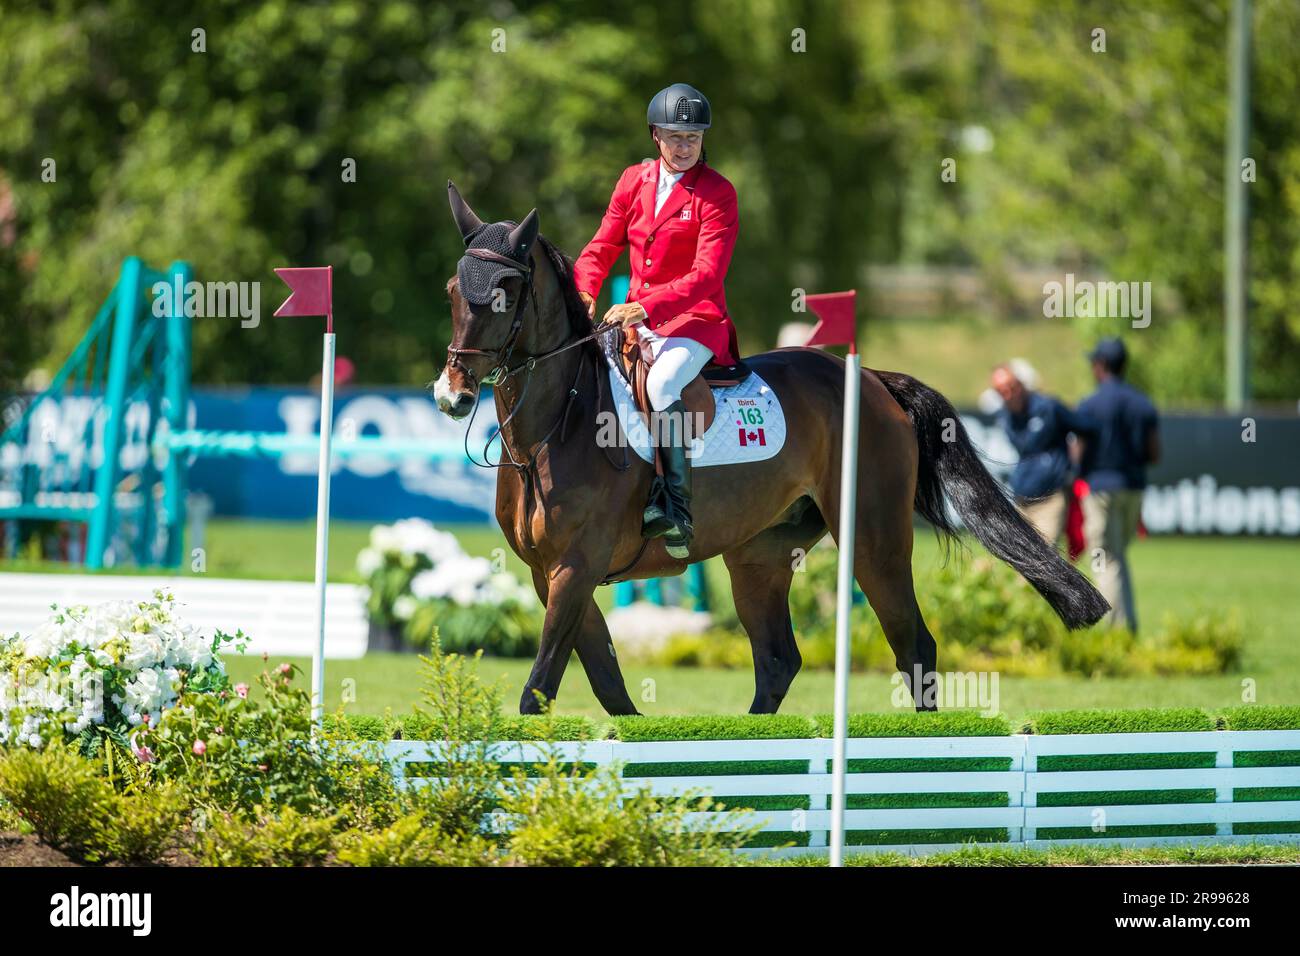 Mario Deslauriers of Canada competes during the FEI Nations Cup in Langley, B.C., on June, 4, 2023. Stock Photo